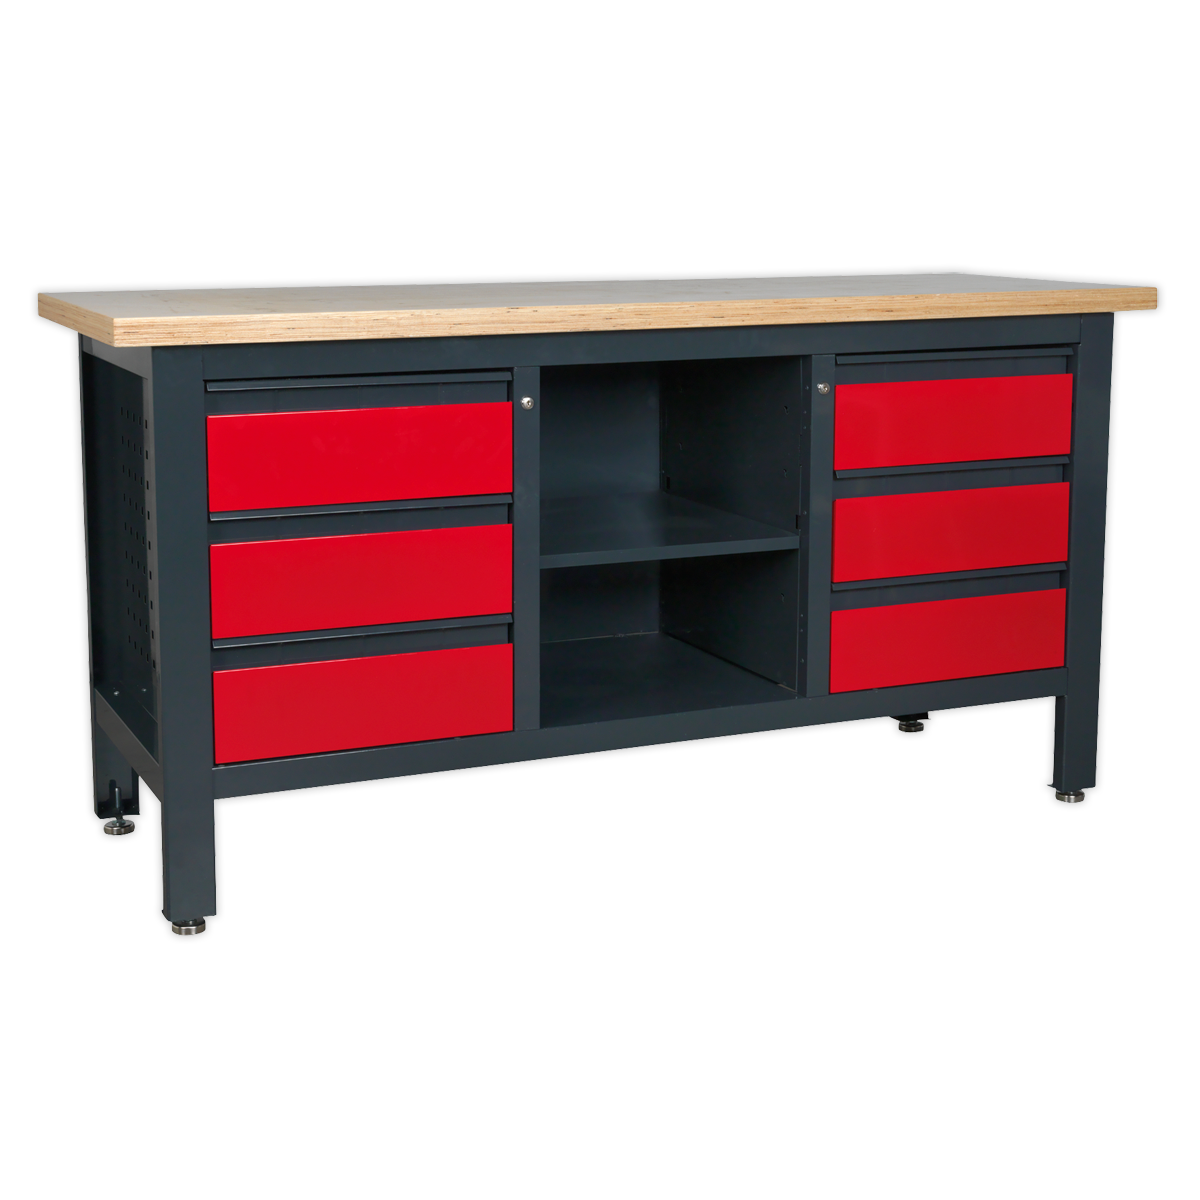 Sealey Workstation with 6 Drawers & Open Storage